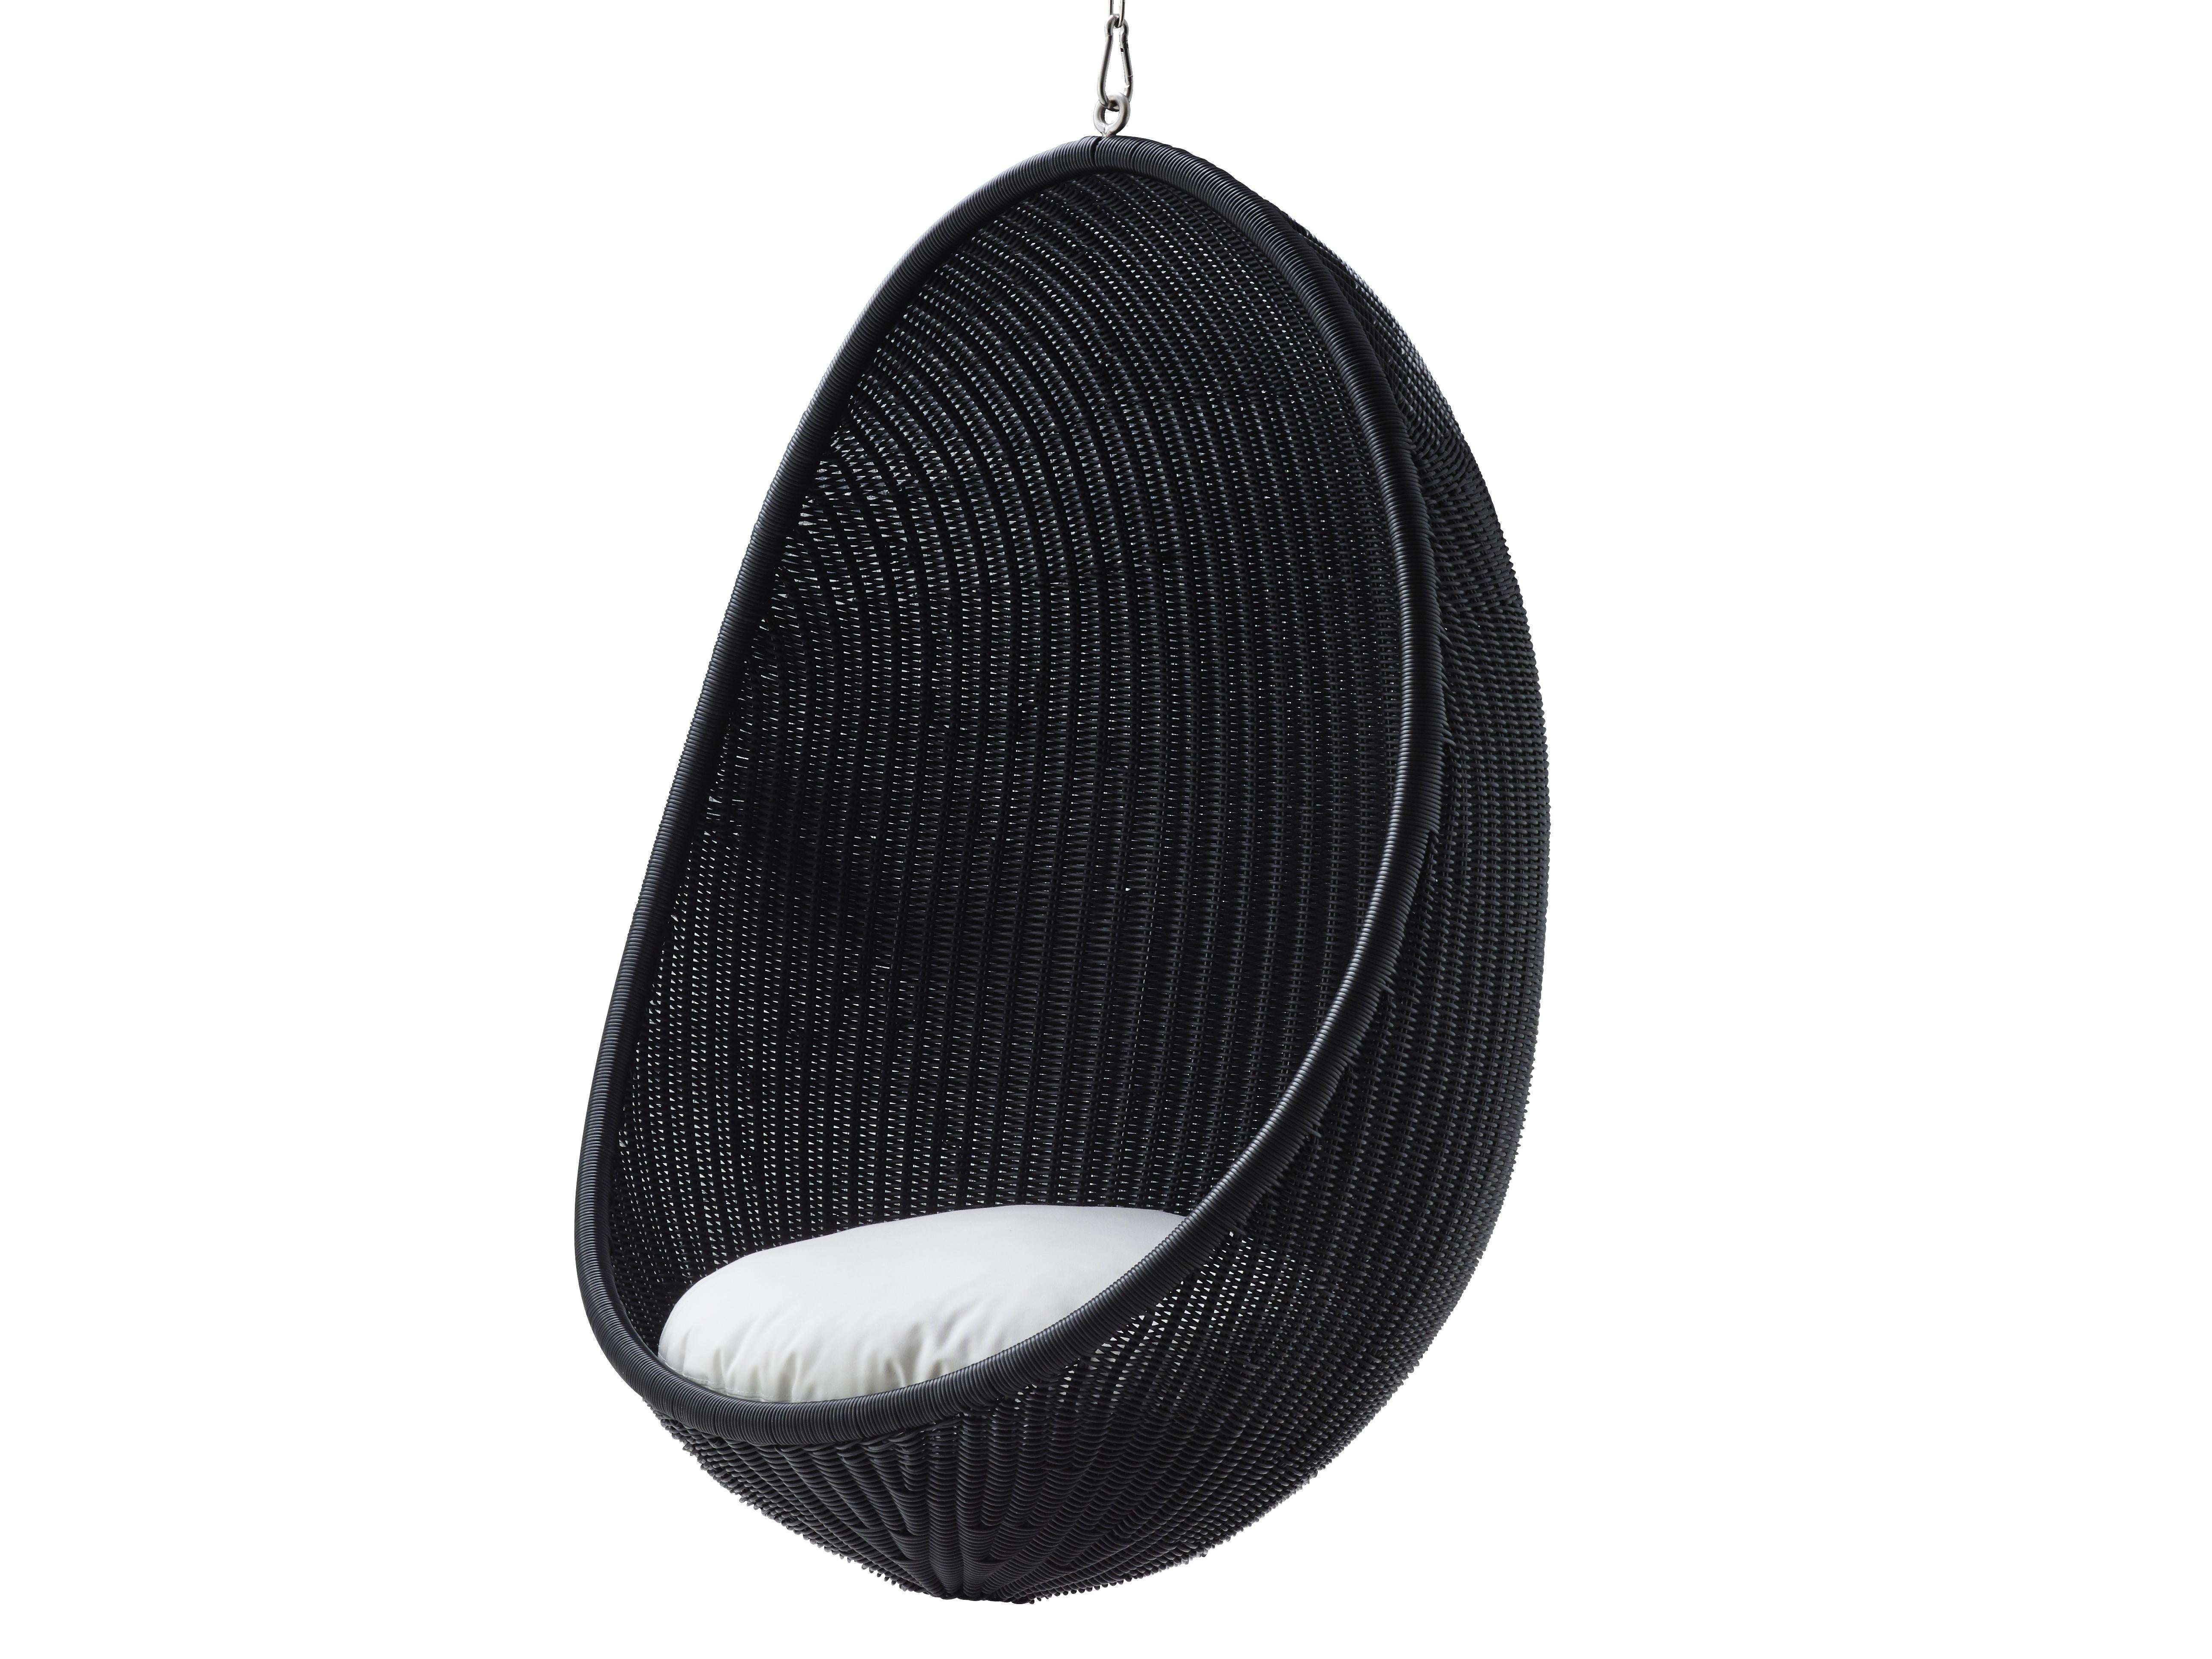 Rattan Egg Hanging Chair by Nanna Ditzel, New Edition